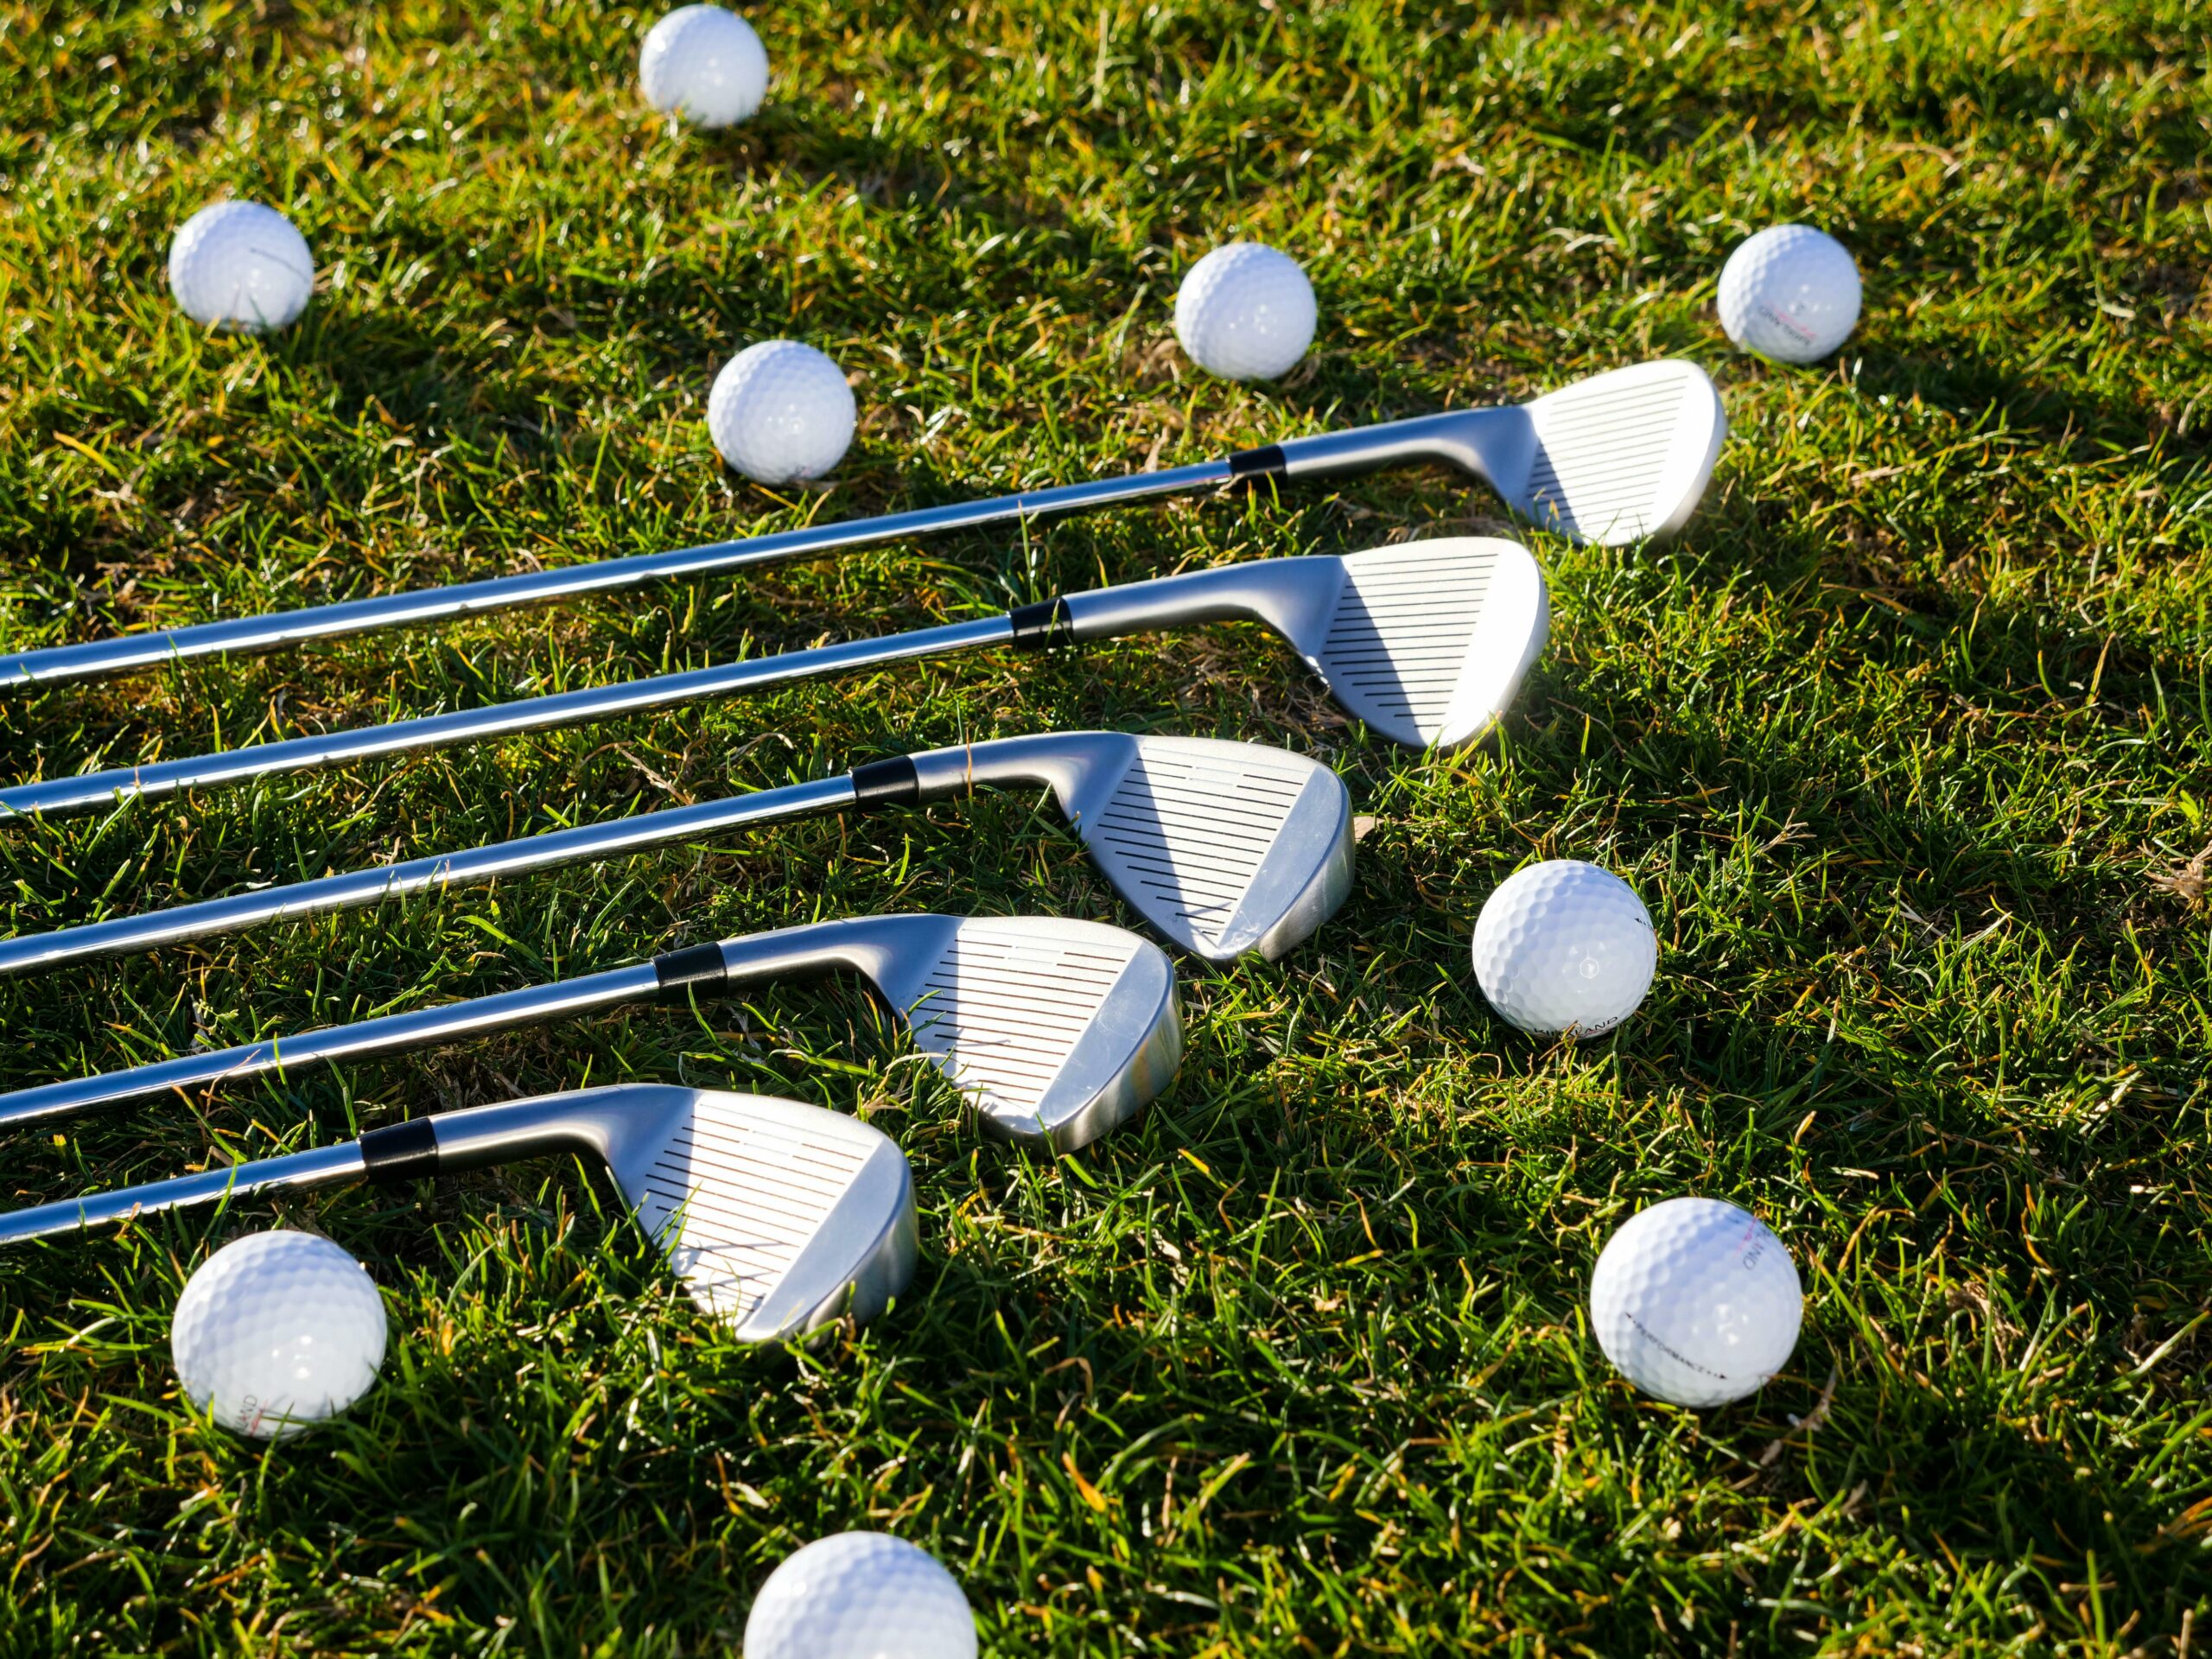 A set of irons laying on the ground surrounded by golf balls